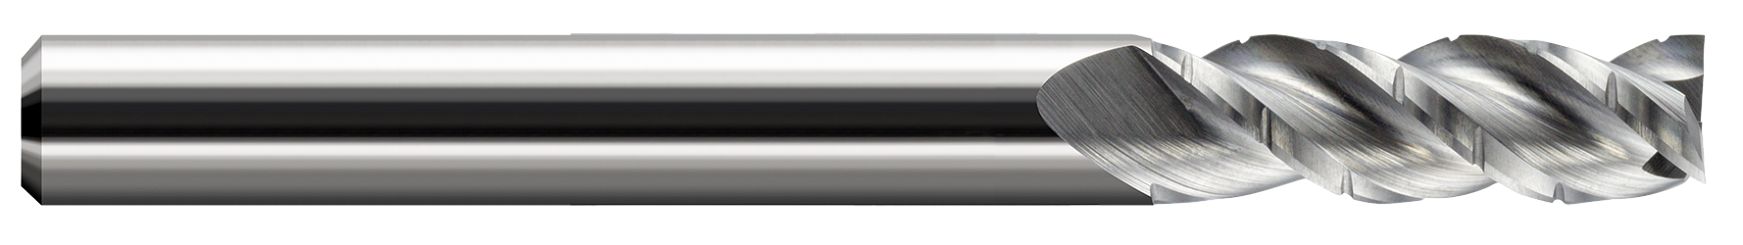 Variable Helix End Mills for Aluminum Alloys-Chipbreaker Roughers-Square